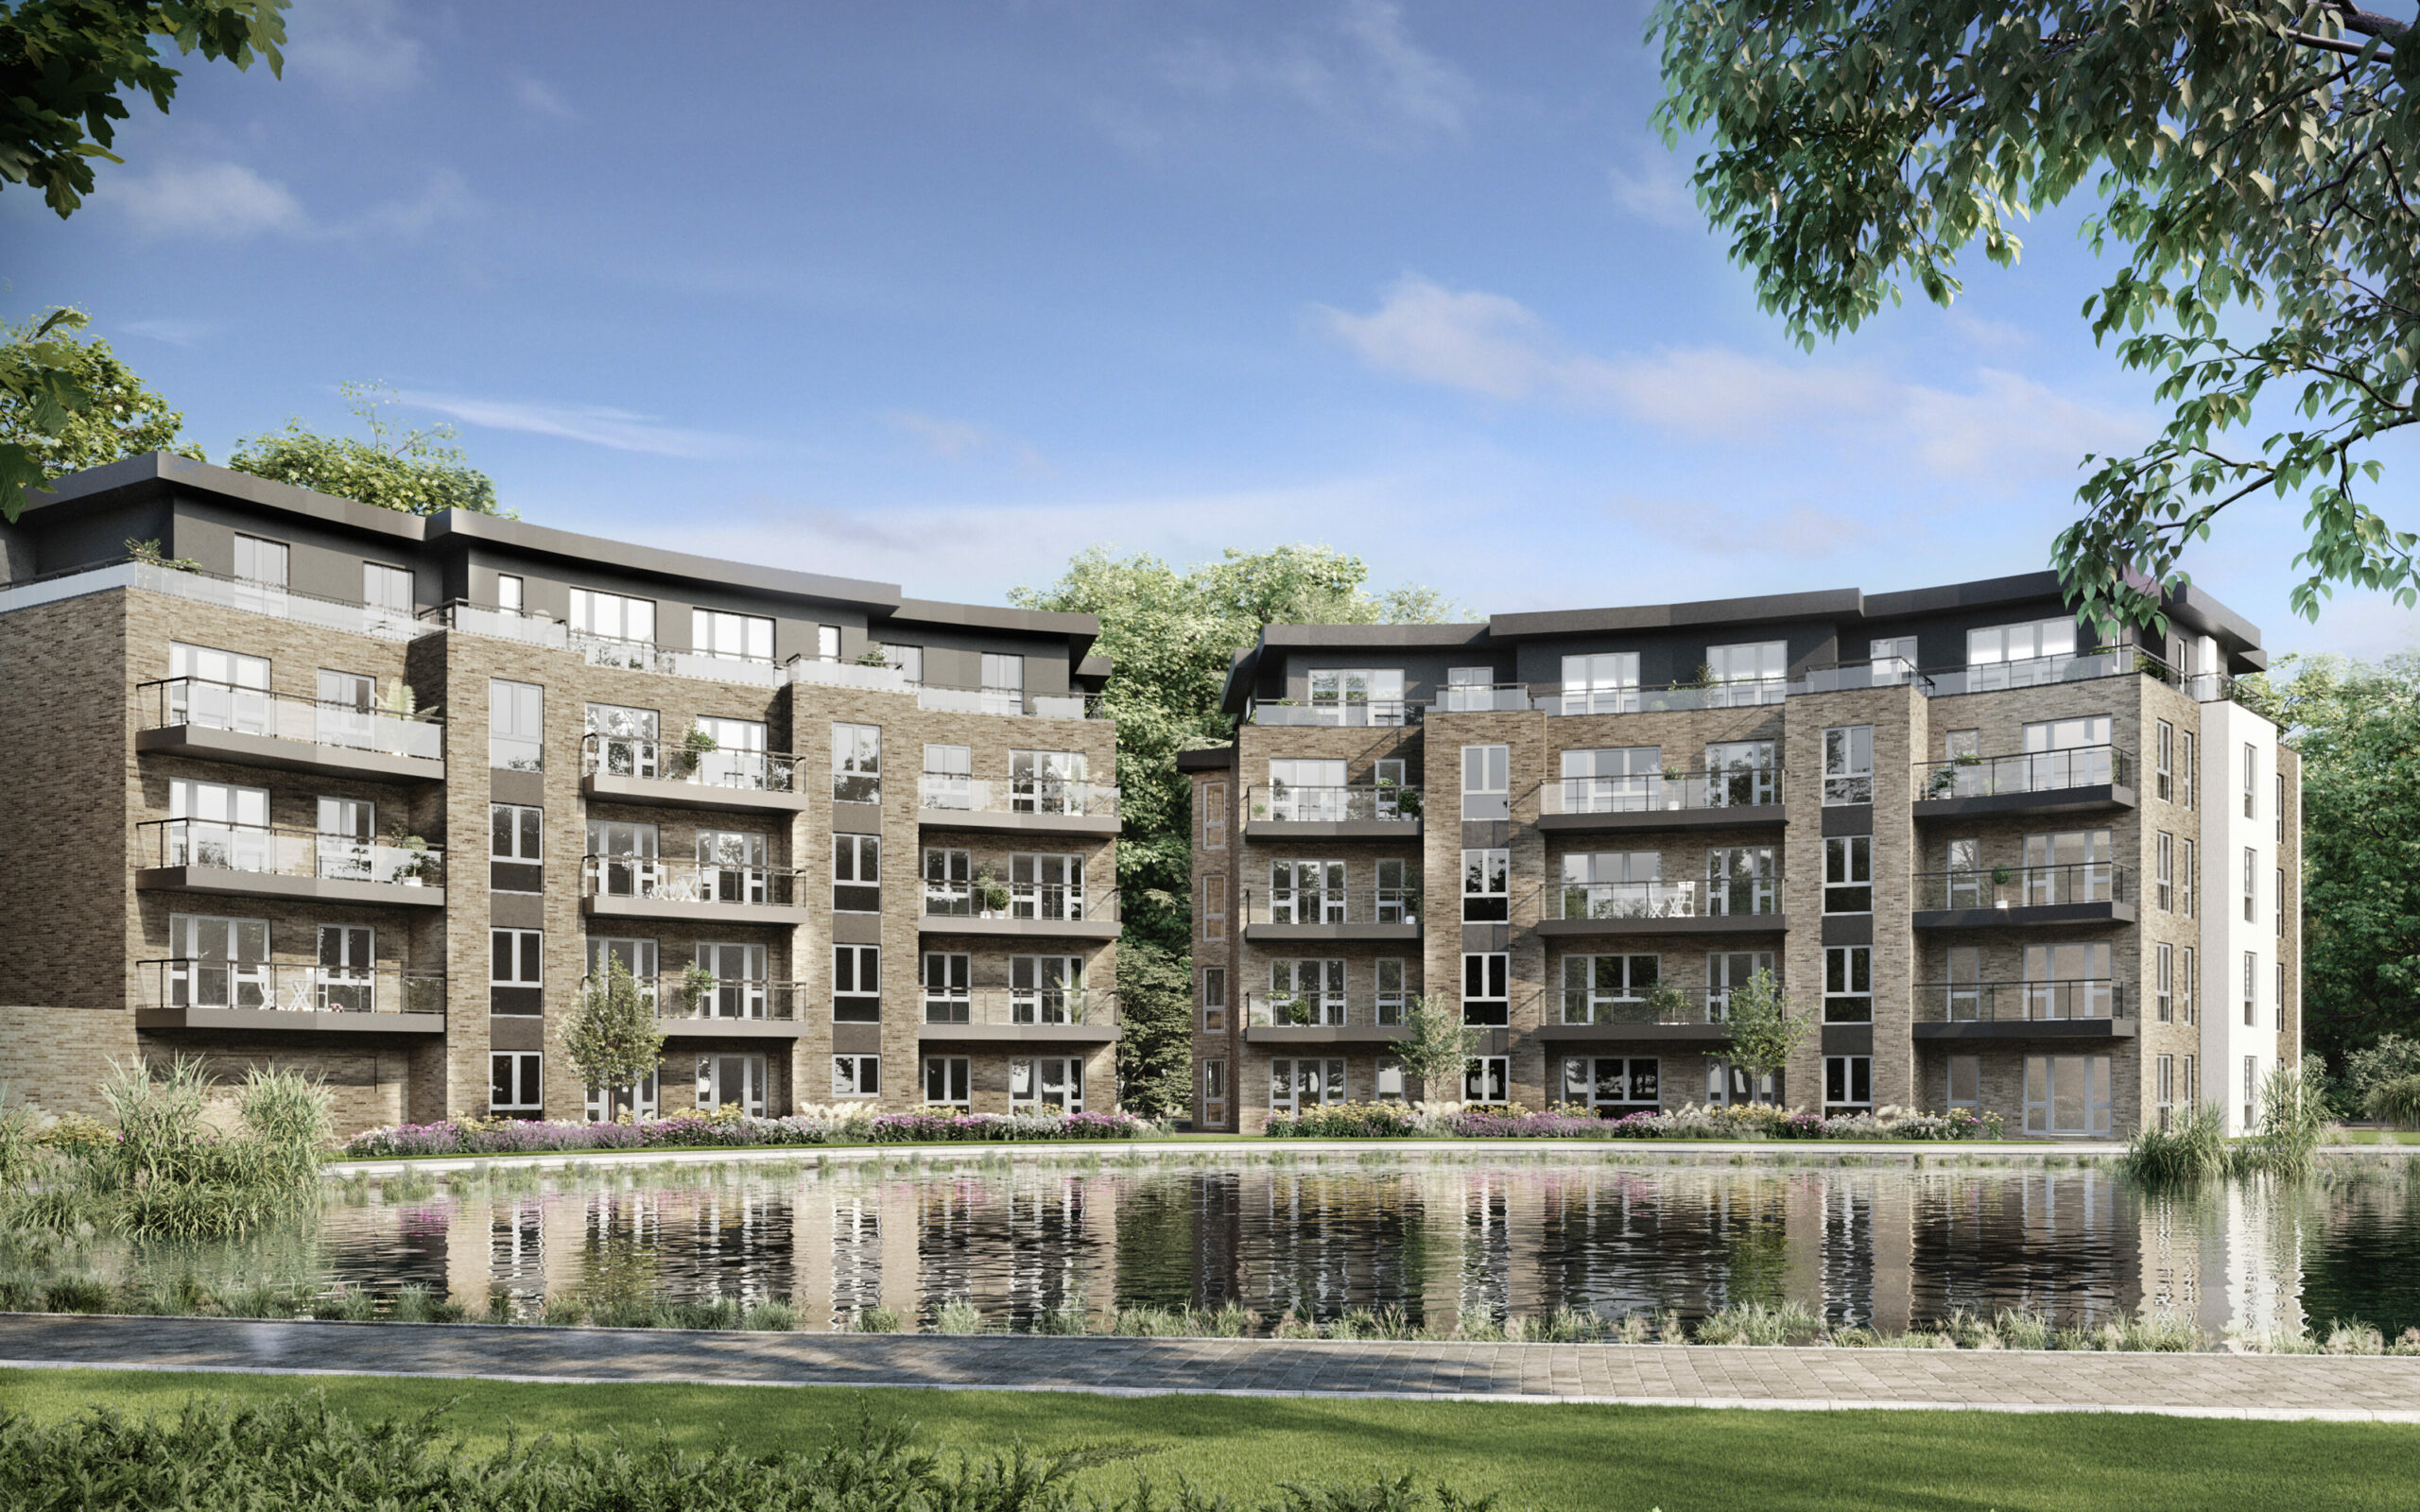 An external image of Langley Park development - available to purchase through Shared Ownership on Share to Buy!